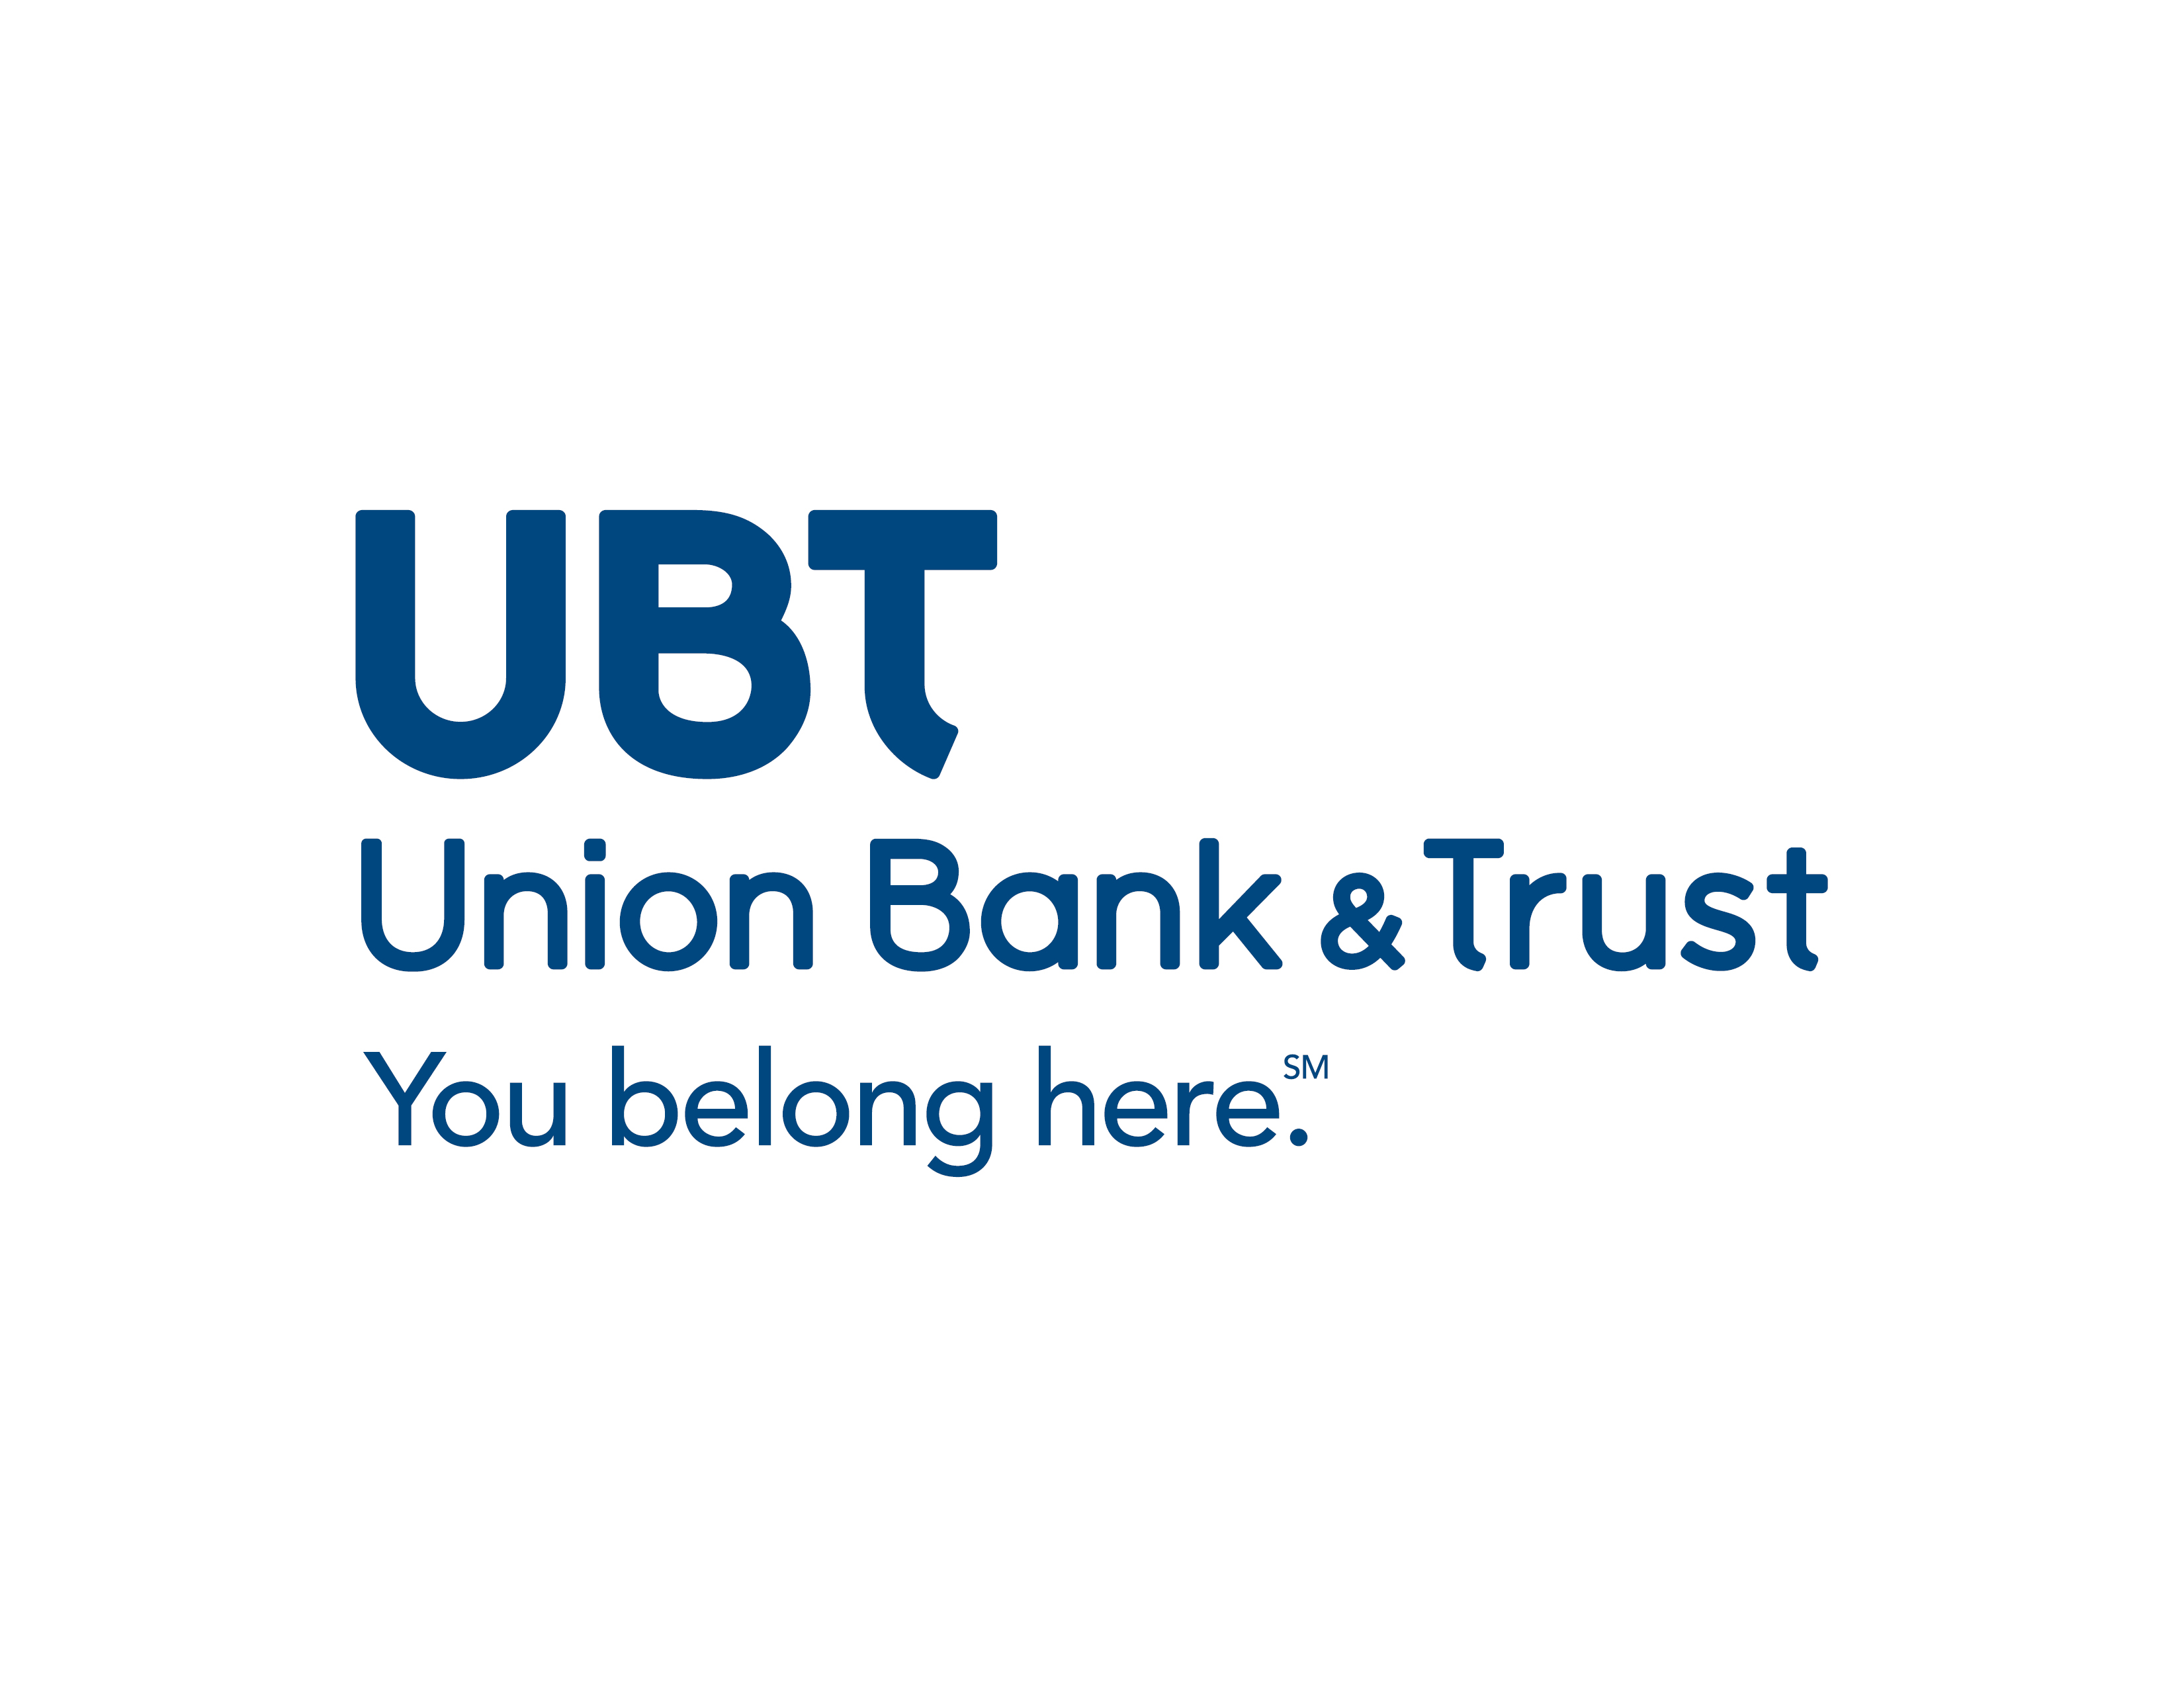 B. Union Bank and Trust (Nivel 2)